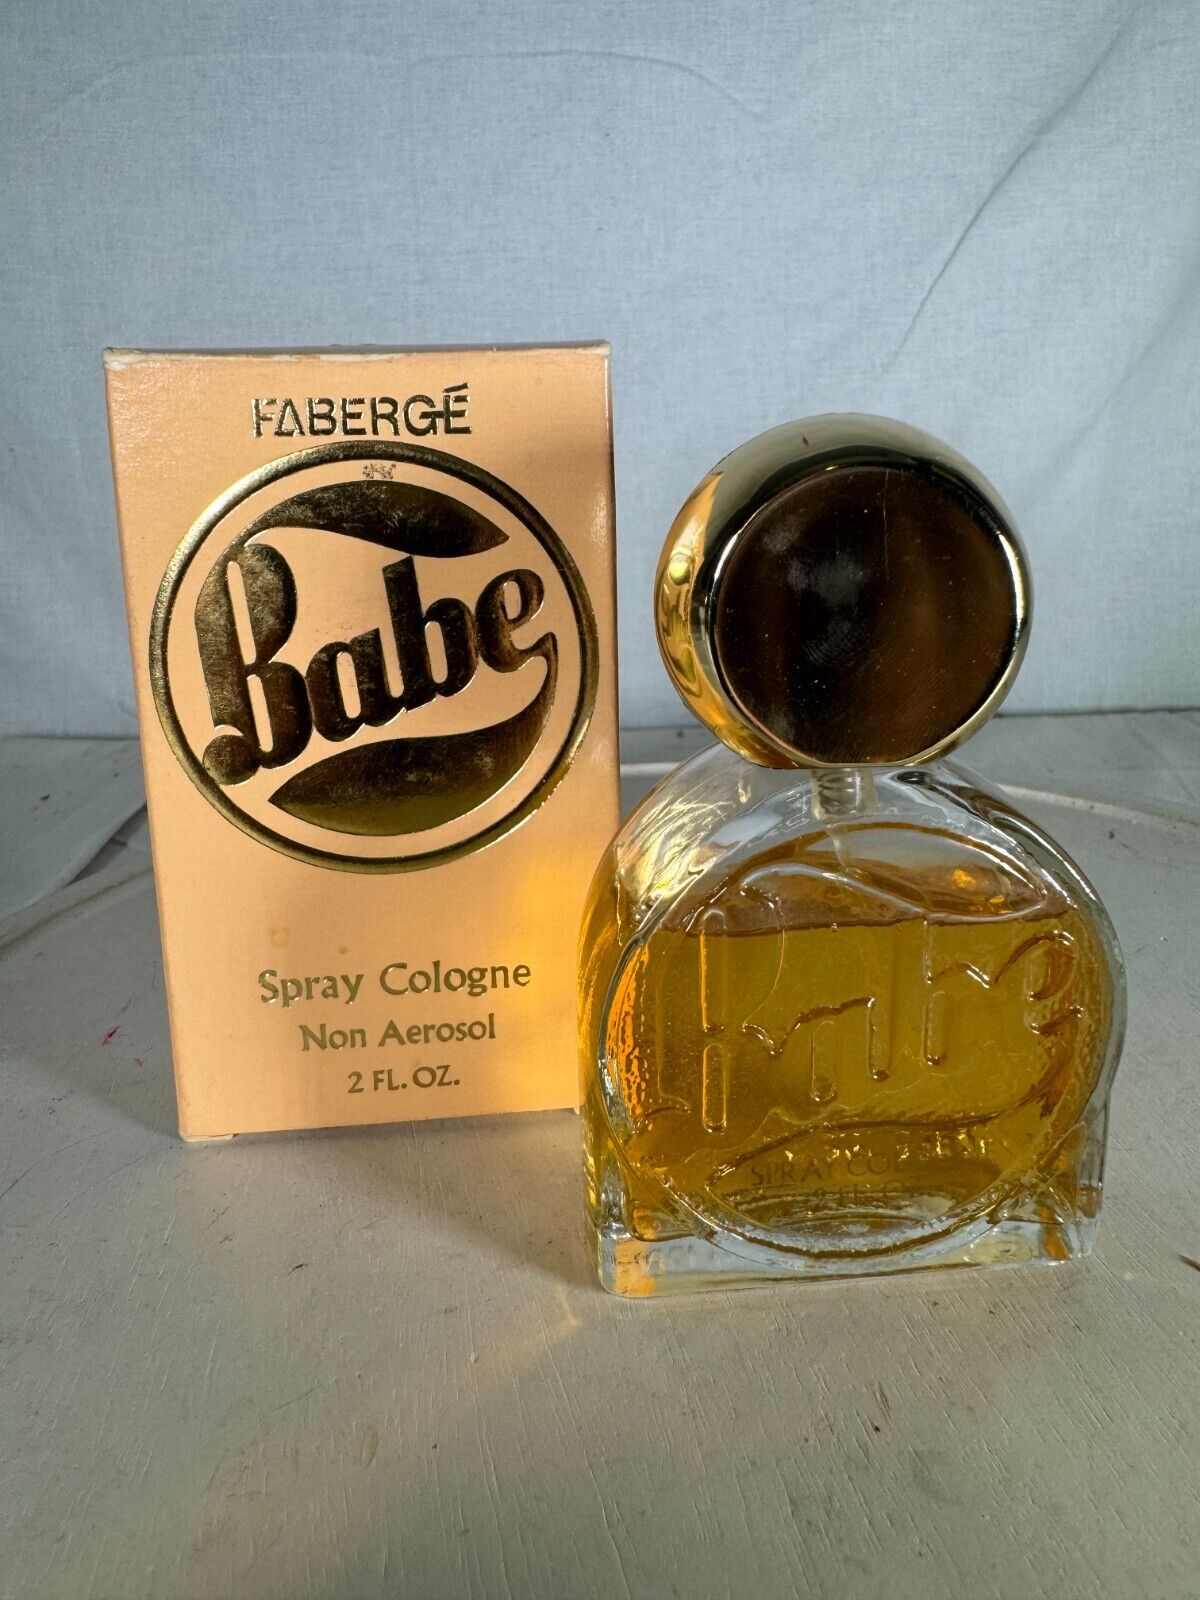 VINTAGE BABE By Fabergé Non Aerosol Cologne Spray 2 fl oz With Box made in USA